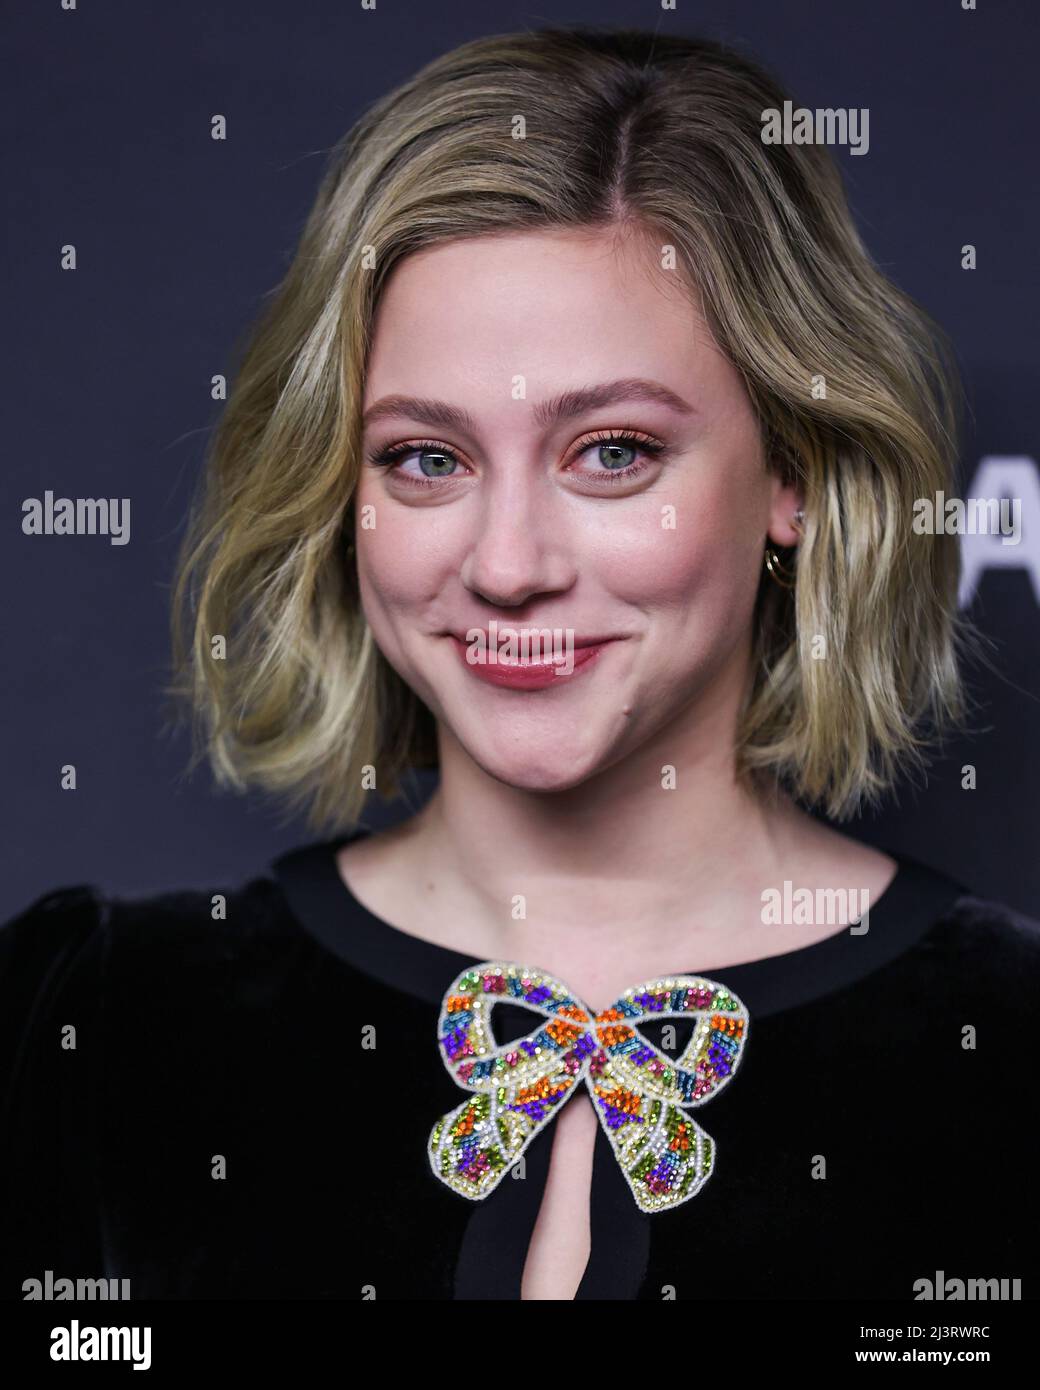 HOLLYWOOD, LOS ANGELES, CALIFORNIA, USA - APRIL 09: American actress Lili Reinhart arrives at the 2022 PaleyFest LA - The CW's 'Riverdale' held at the Dolby Theatre on April 9, 2022 in Hollywood, Los Angeles, California, United States. (Photo by Xavier Collin/Image Press Agency/Sipa USA) Stock Photo